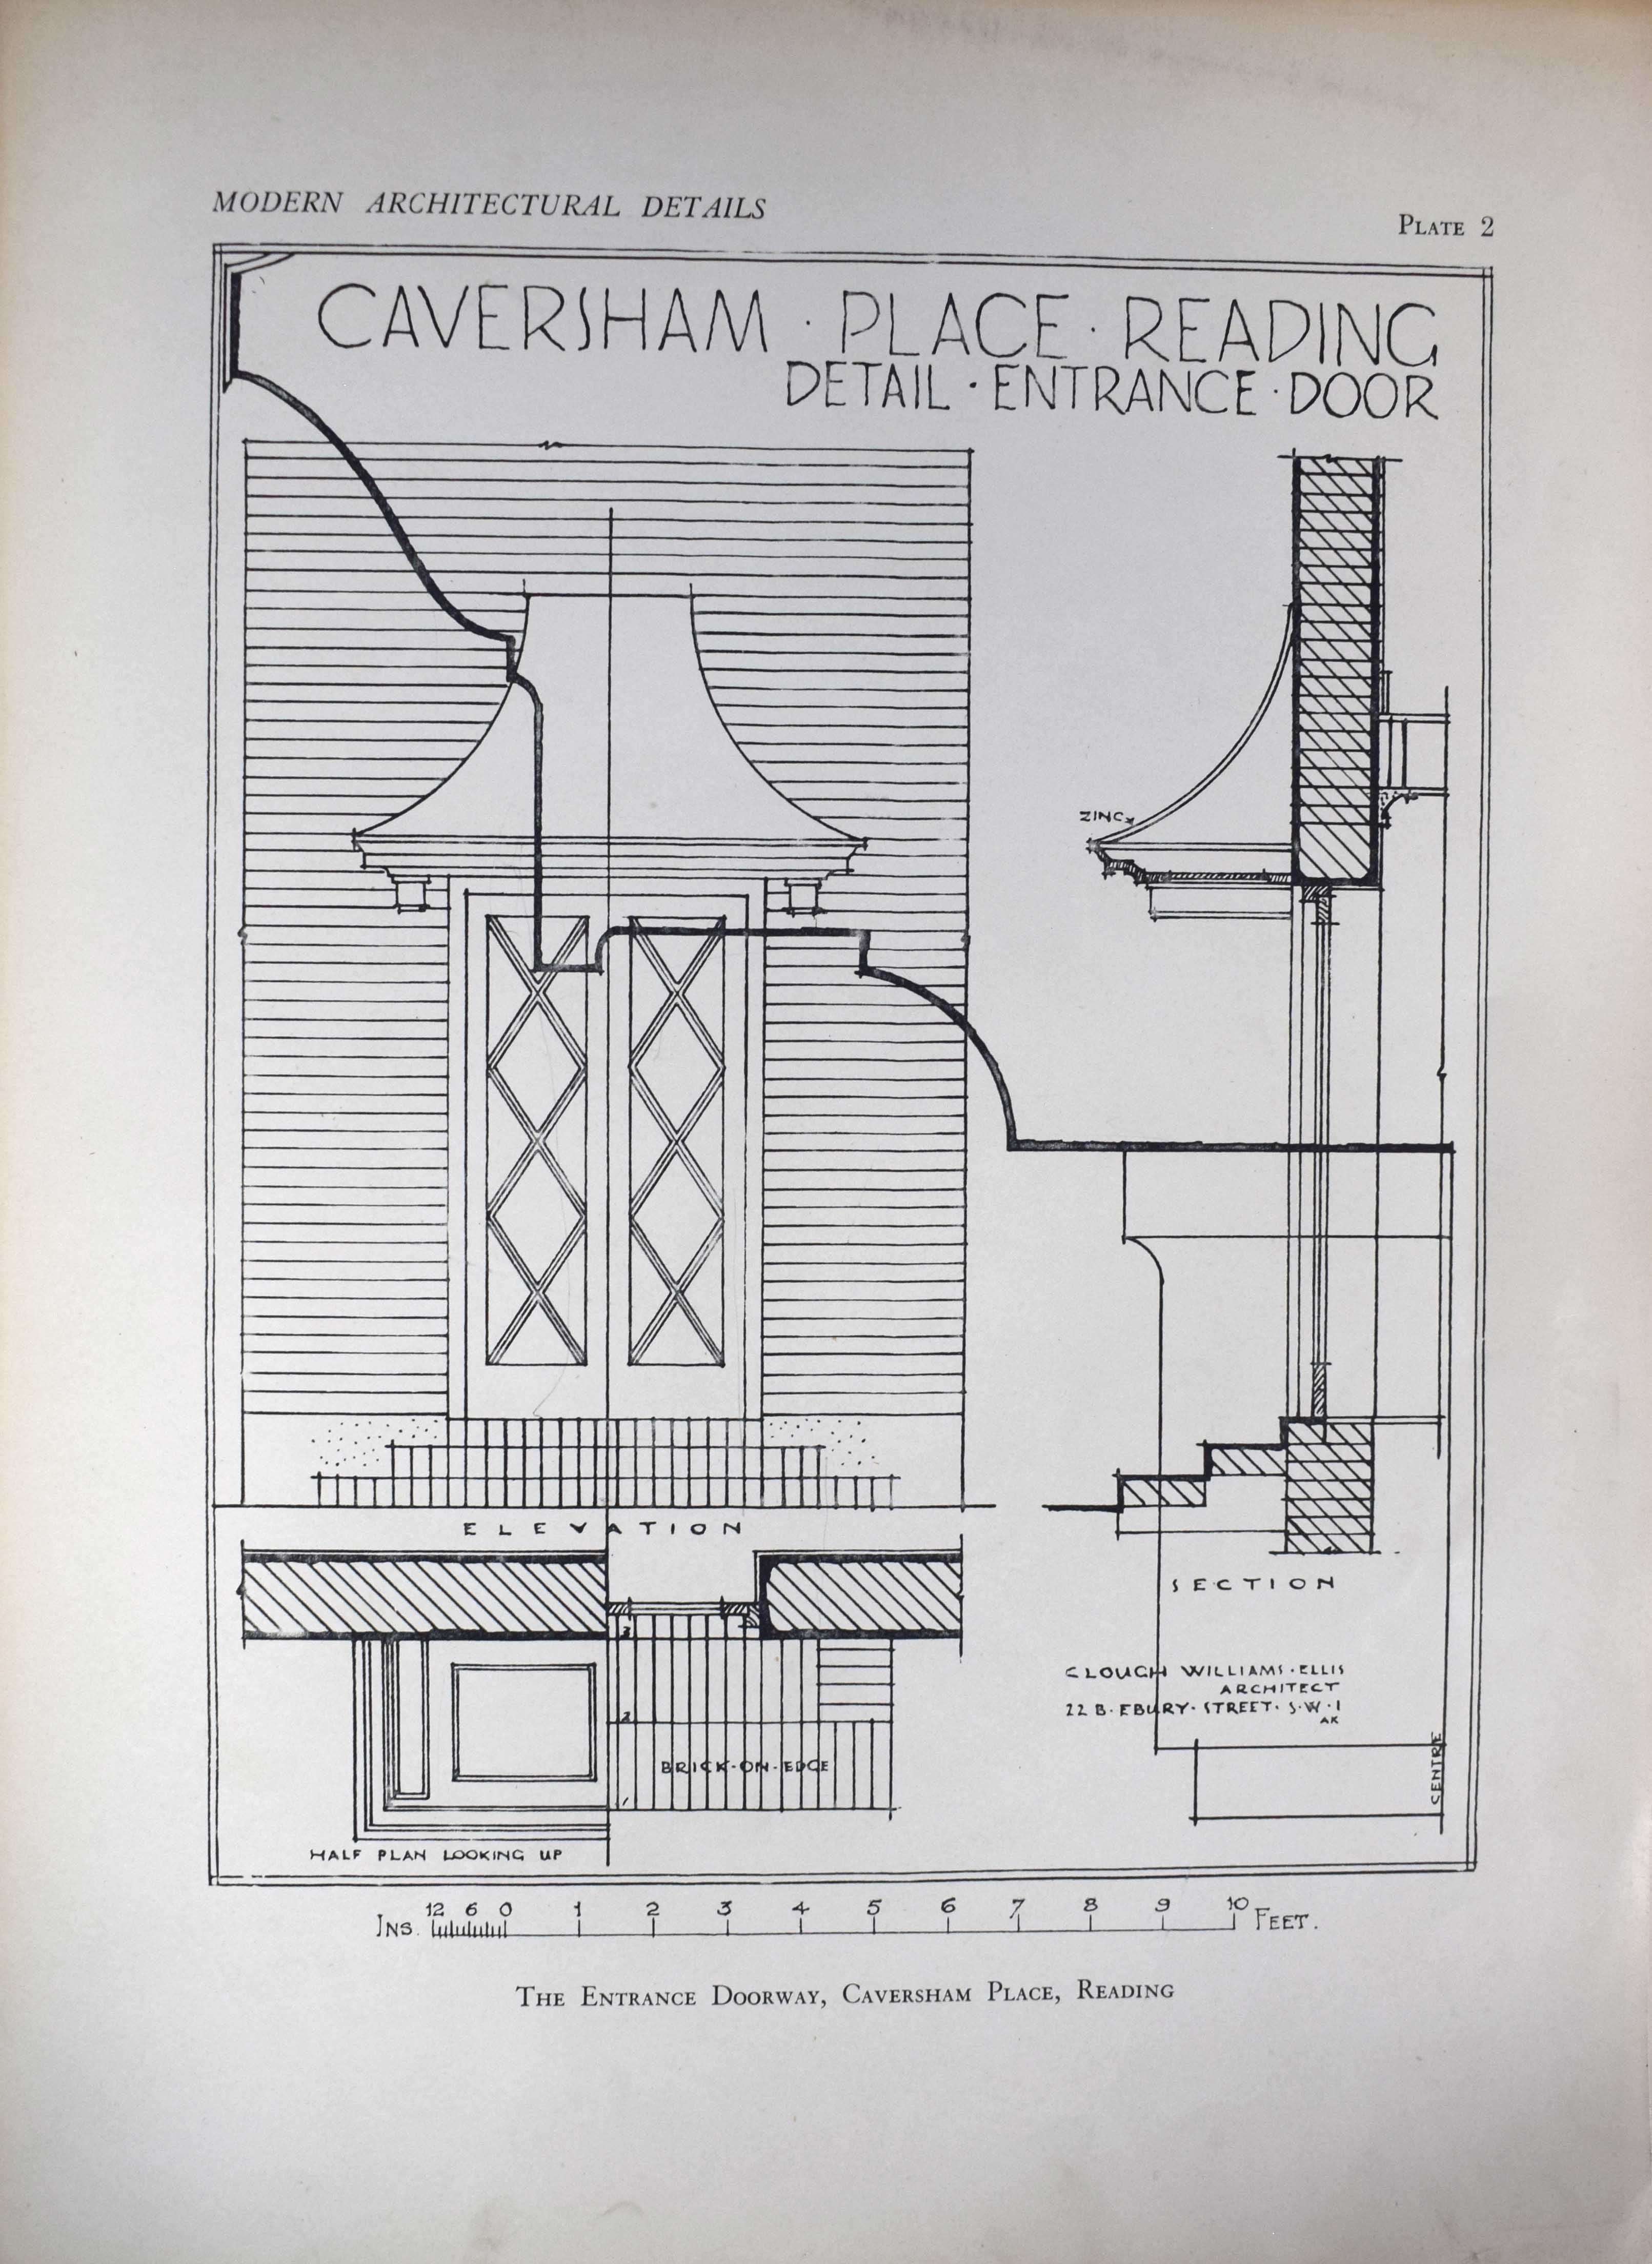 Modern Architectural Details. A Portfolio of Eighty Plates of Photographs & Working Drawings.